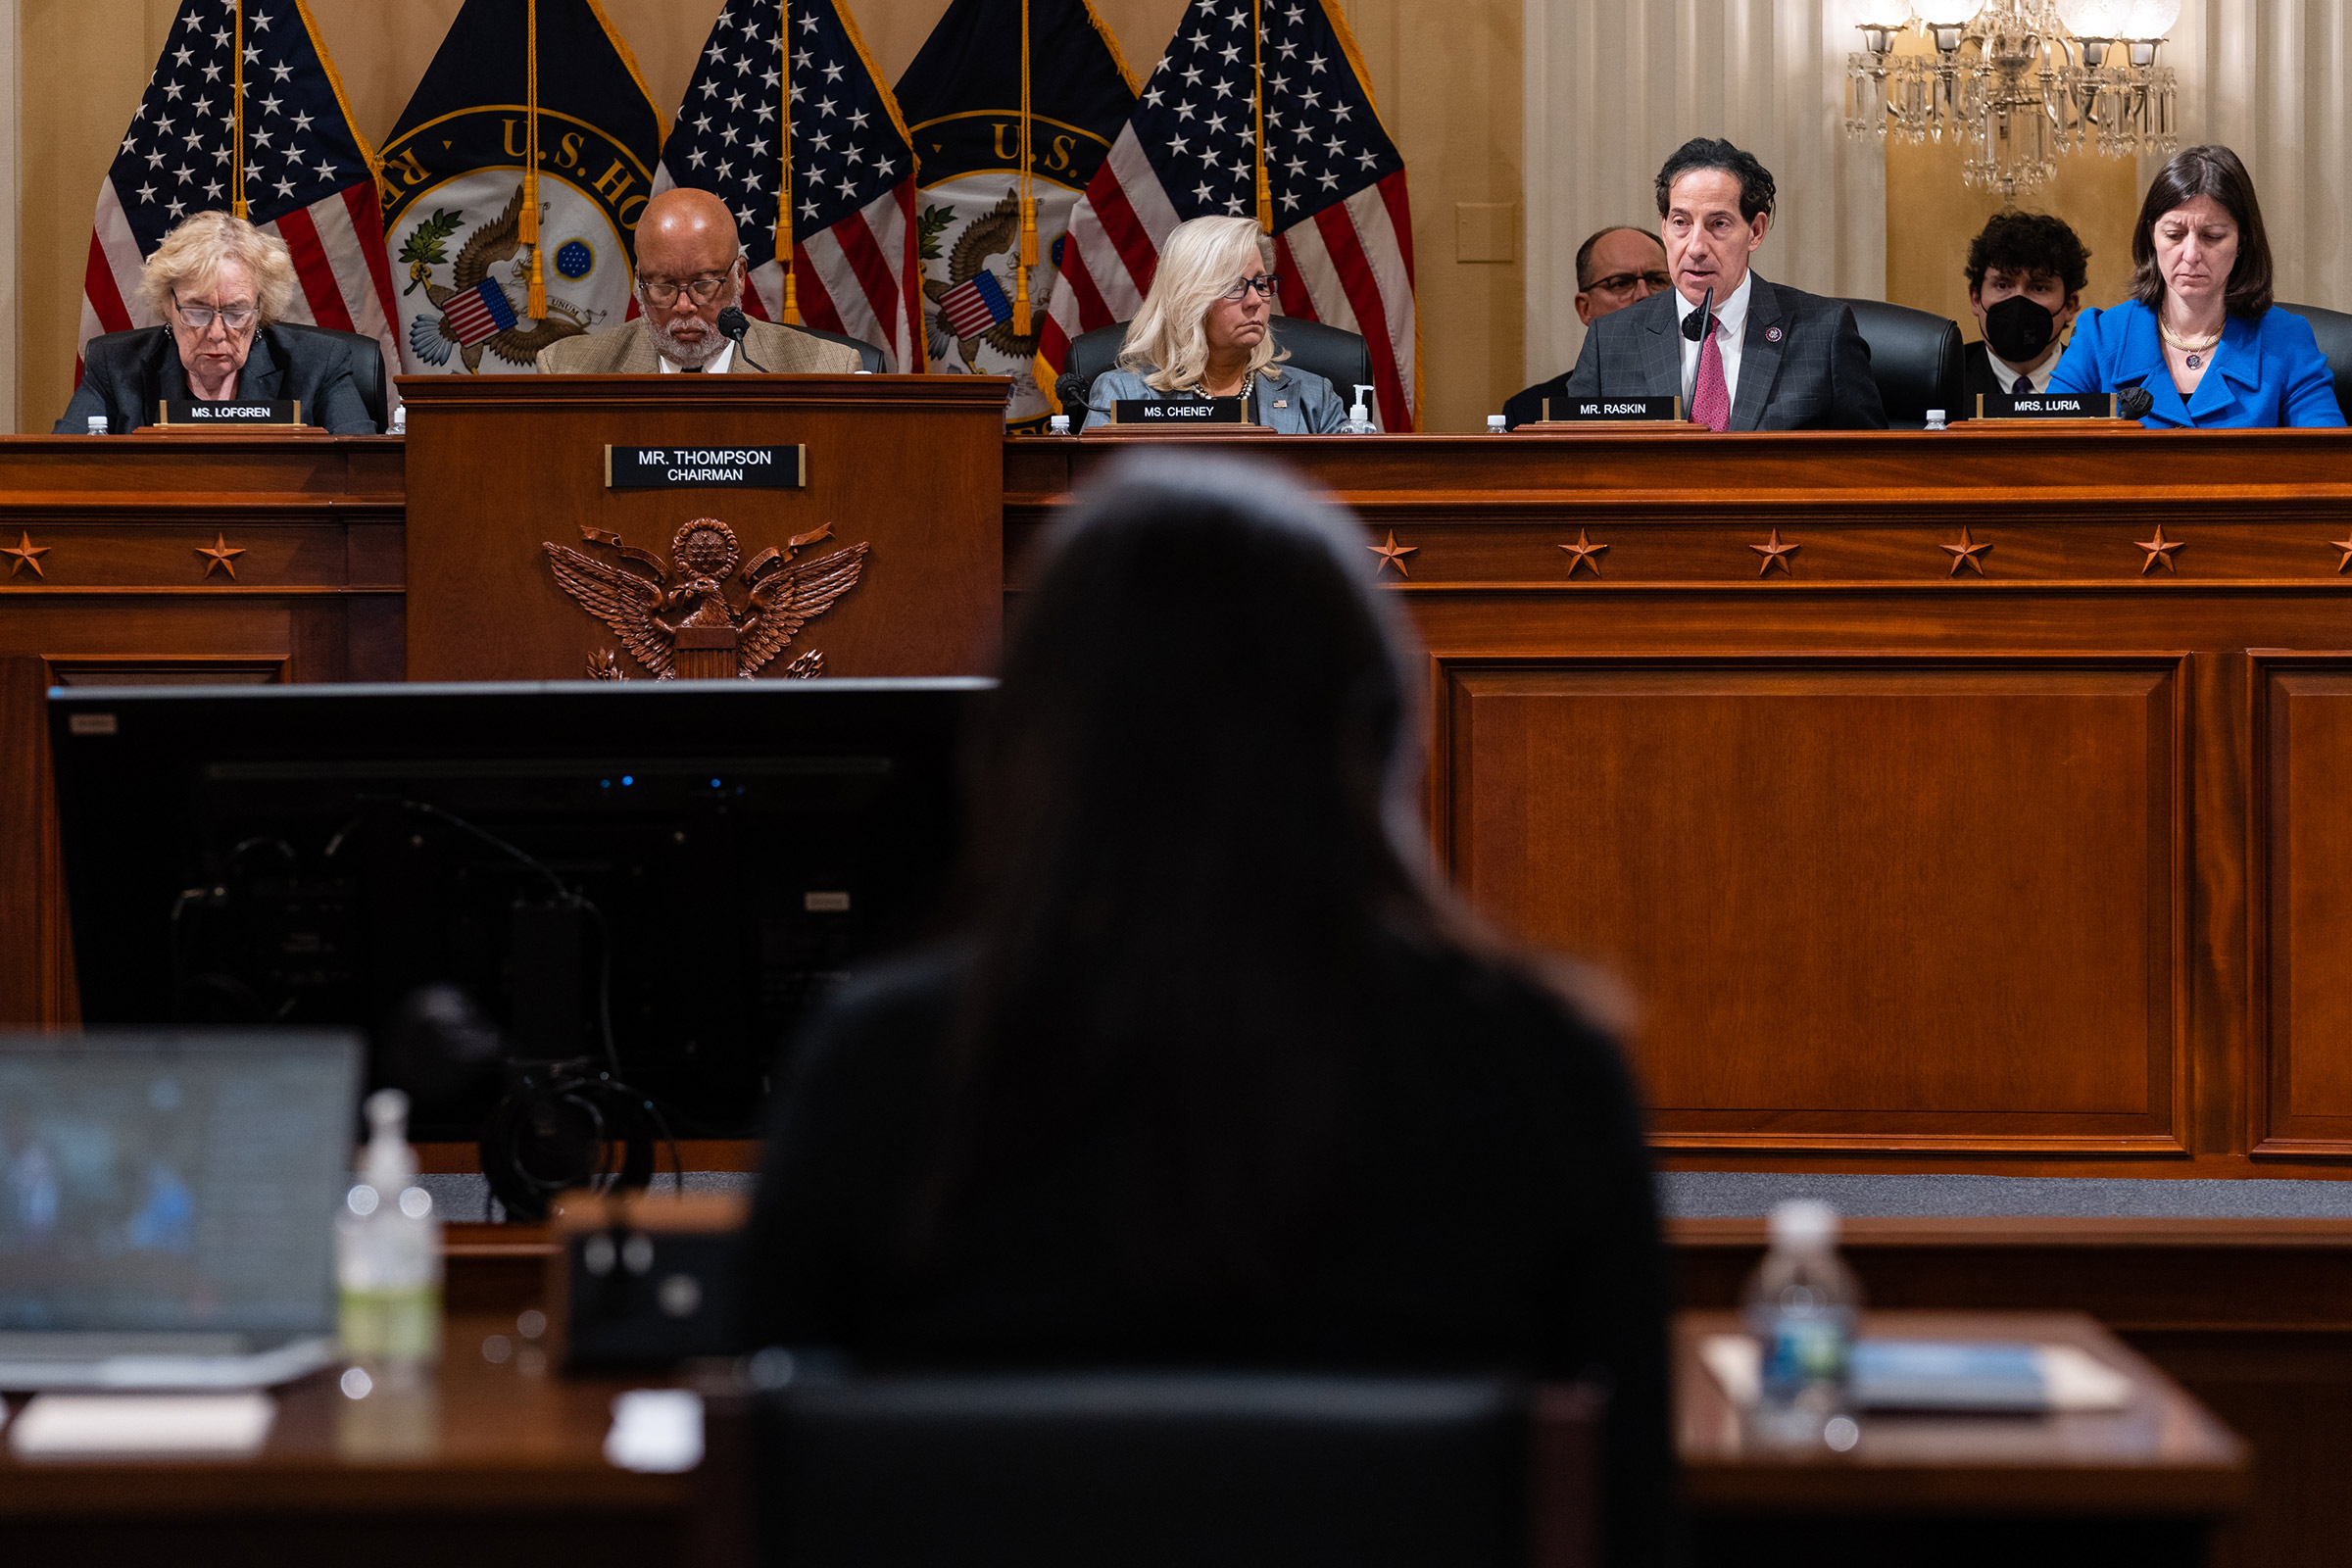 Representative Jamie Raskin, a Democrat from Maryland, speaks during a business meeting of the House Select Committee to Investigate the January 6th Attack on the U.S. Capitol in Washington, D.C., U.S., on Monday, March 28, 2022. (Eric Lee—Bloomberg/Getty Images)